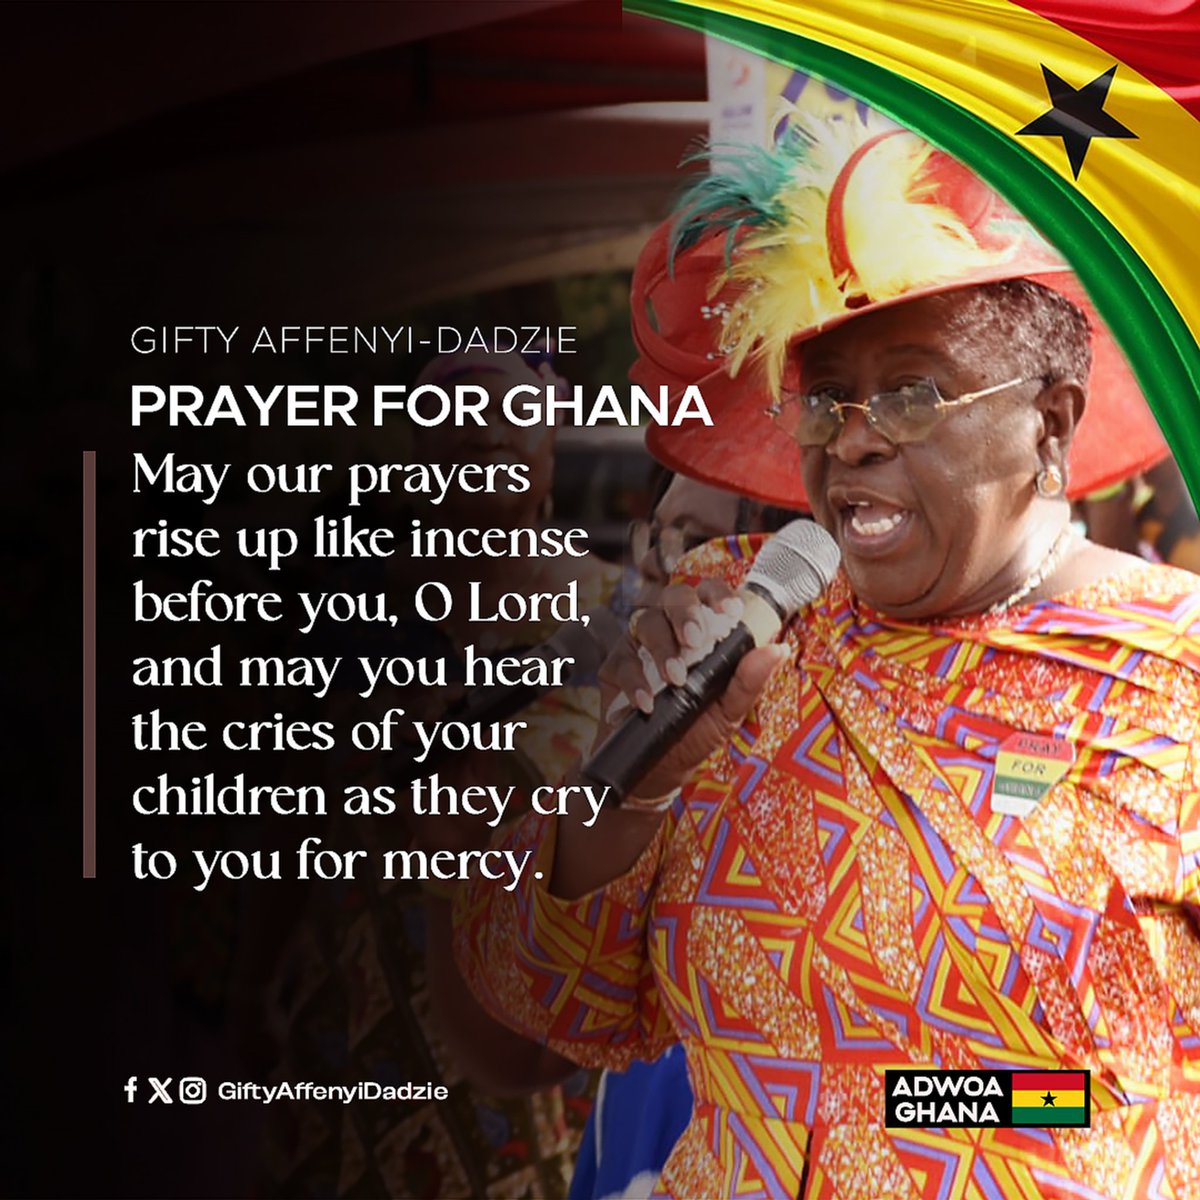 May our prayers rise up like incense before you, O Lord, and may you hear the cries of your children as they cry to you for mercy. 

-A prayer for Ghana

#GiftyAffenyiDadzie
#LoveForGod
#LoveForCountry
#womenleadership
#womenoffaith
#womanofprayer